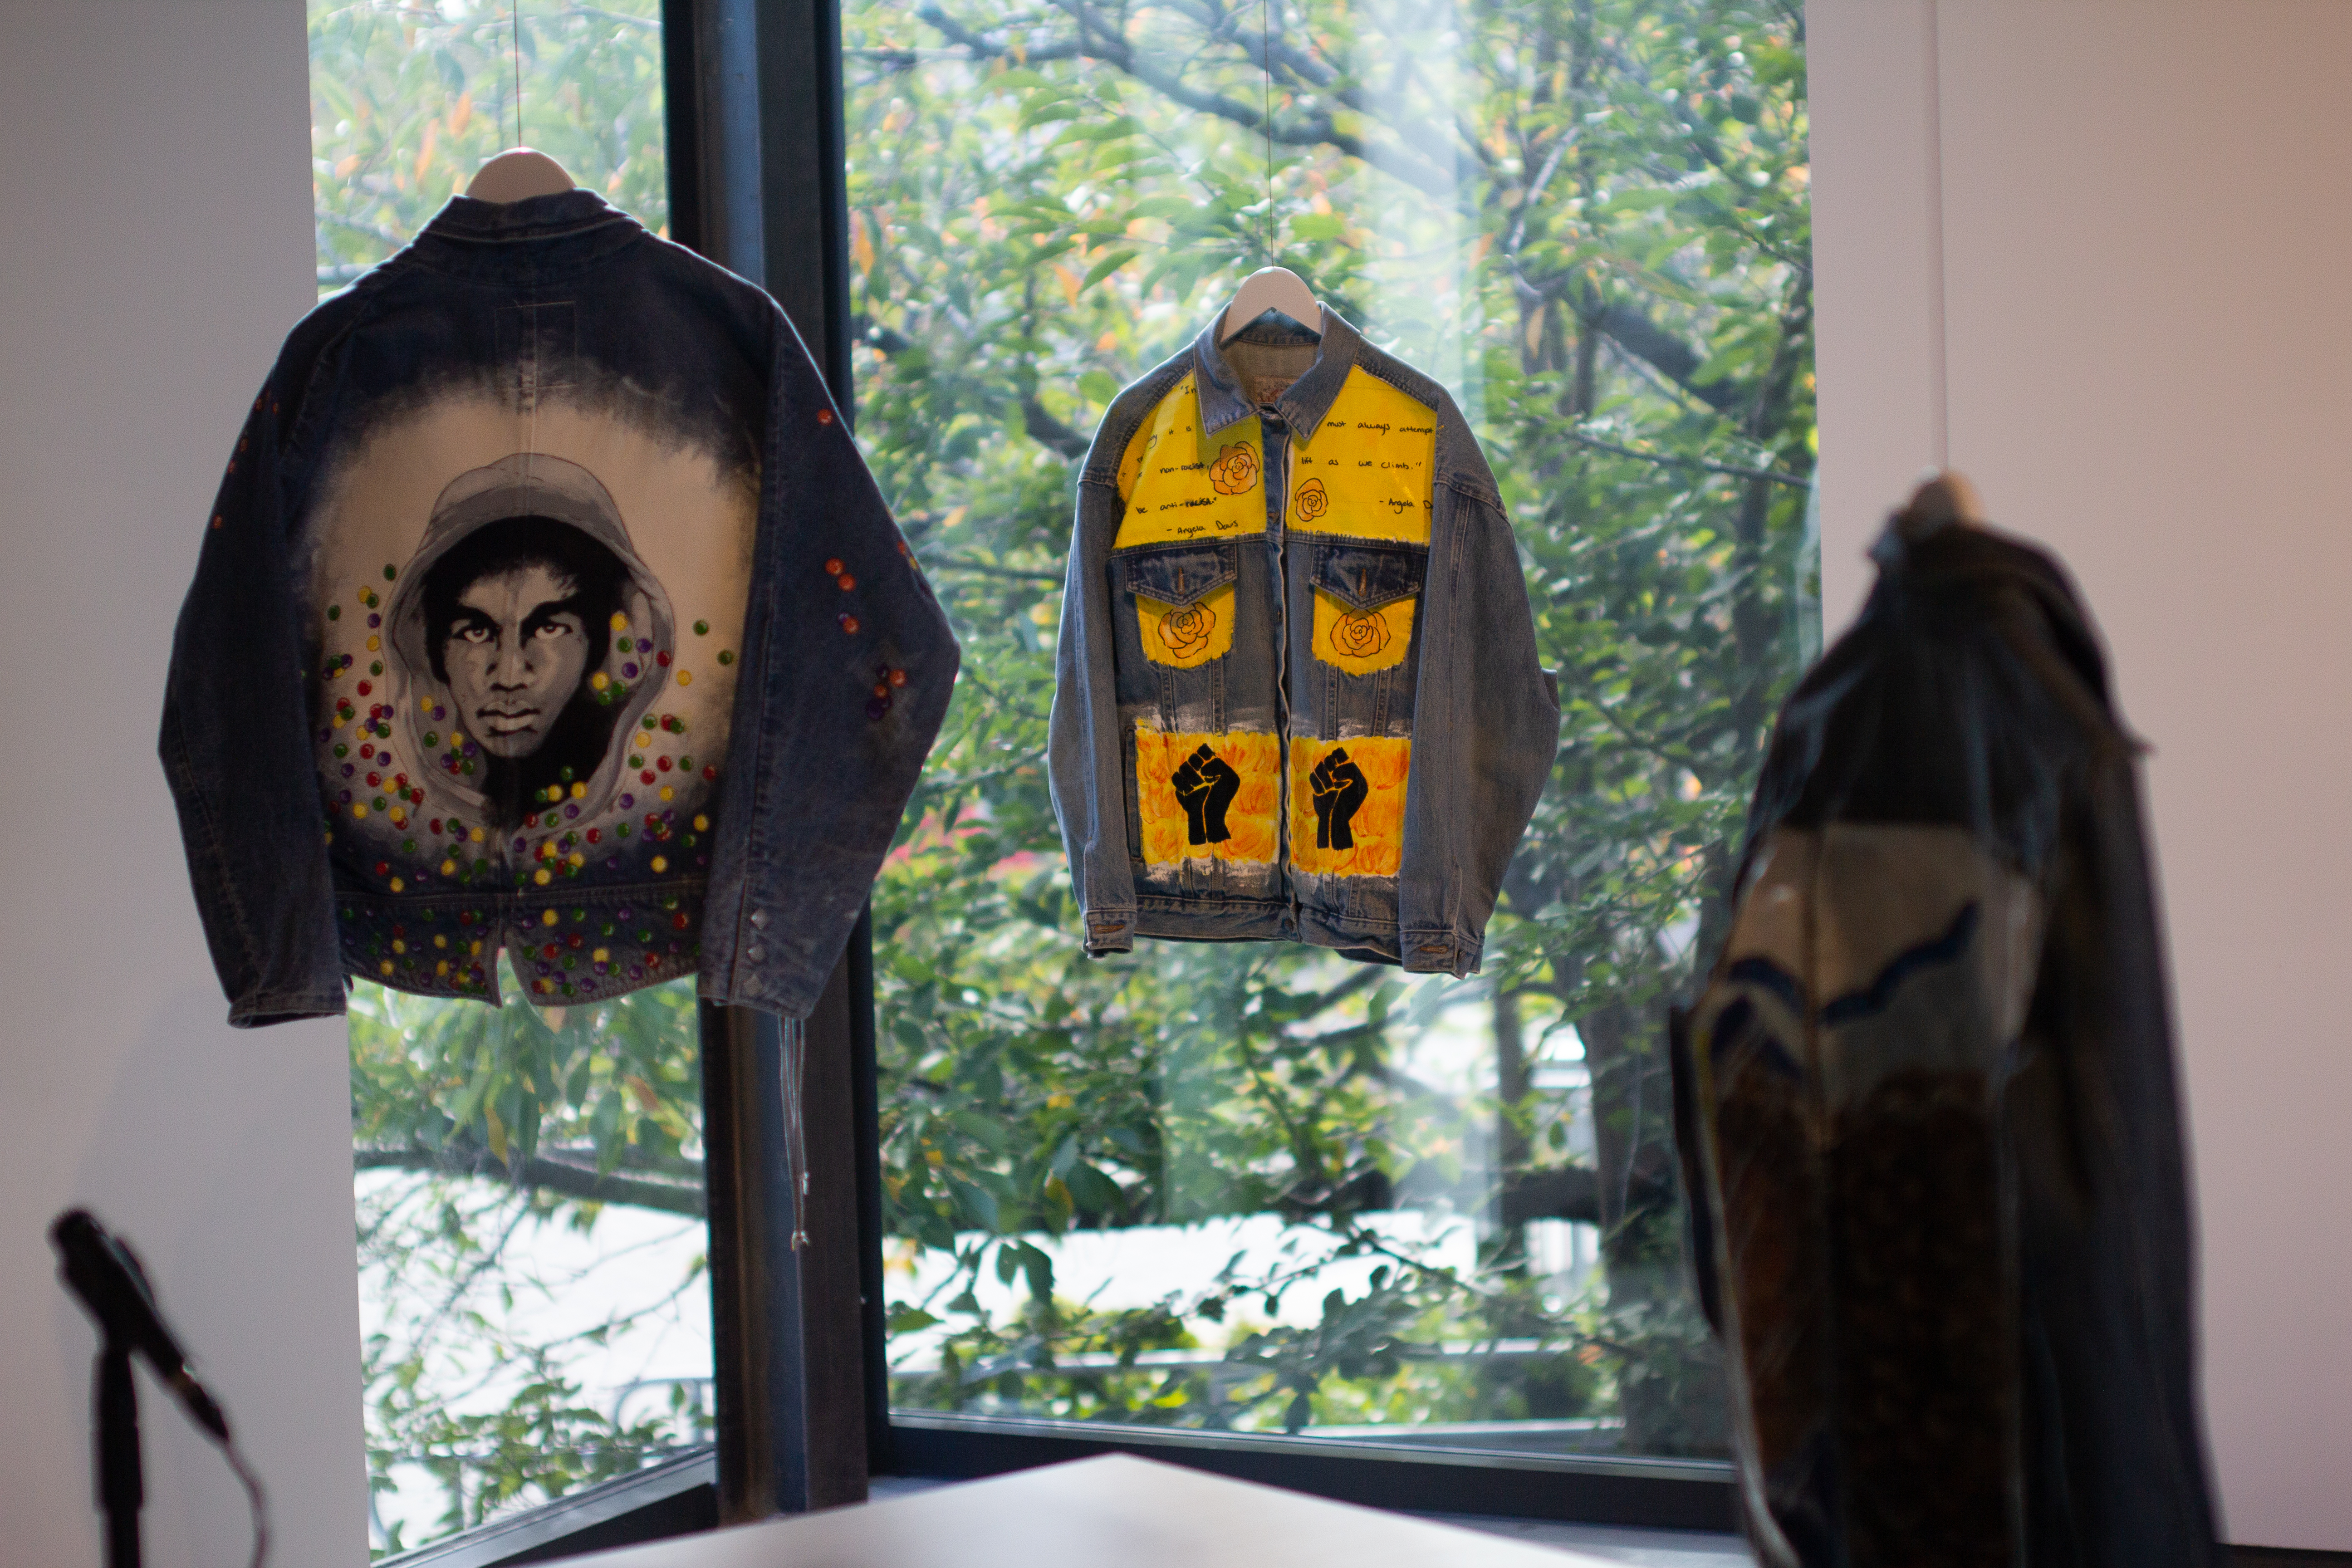 Painted denim jackets by Jackie Schaubel honors Trayvon Martin, who was murdered by a neighborhood watchman in 2012, and political activist and scholar Angela Davis.